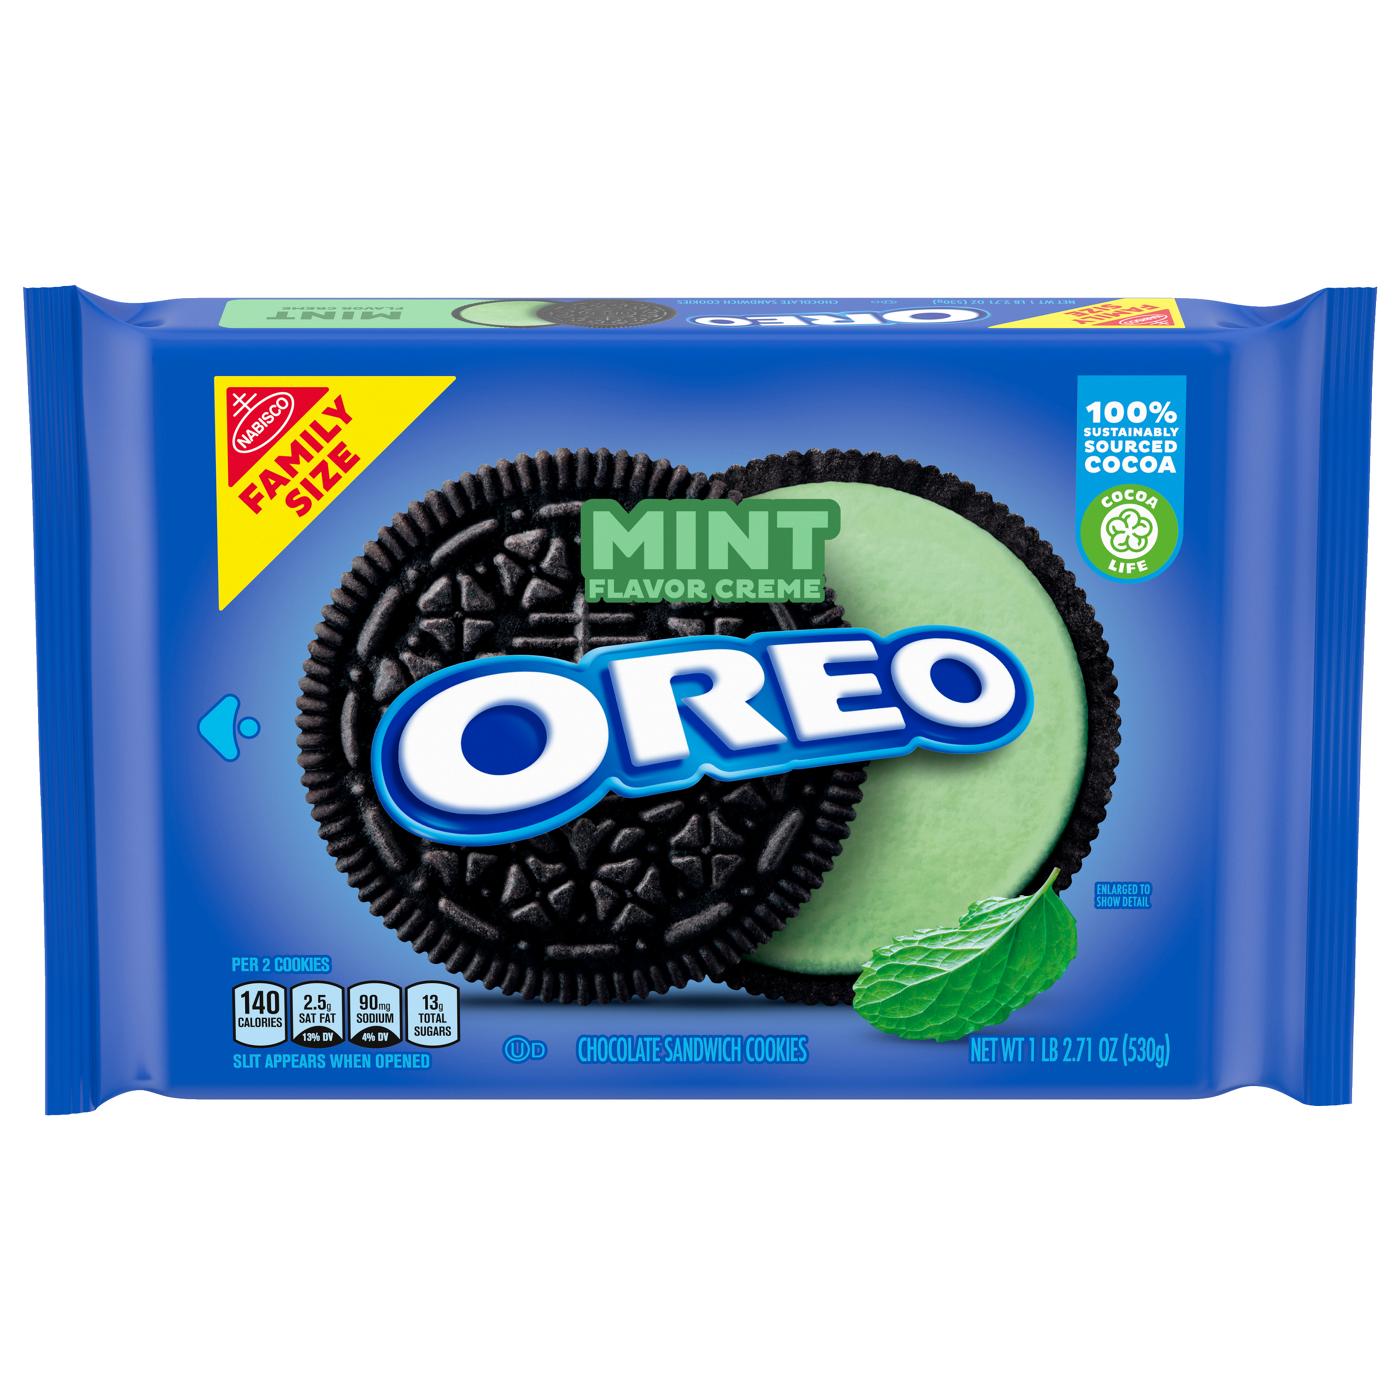 Nabisco Oreo Mint Creme Sandwich Cookies Family Size; image 1 of 4